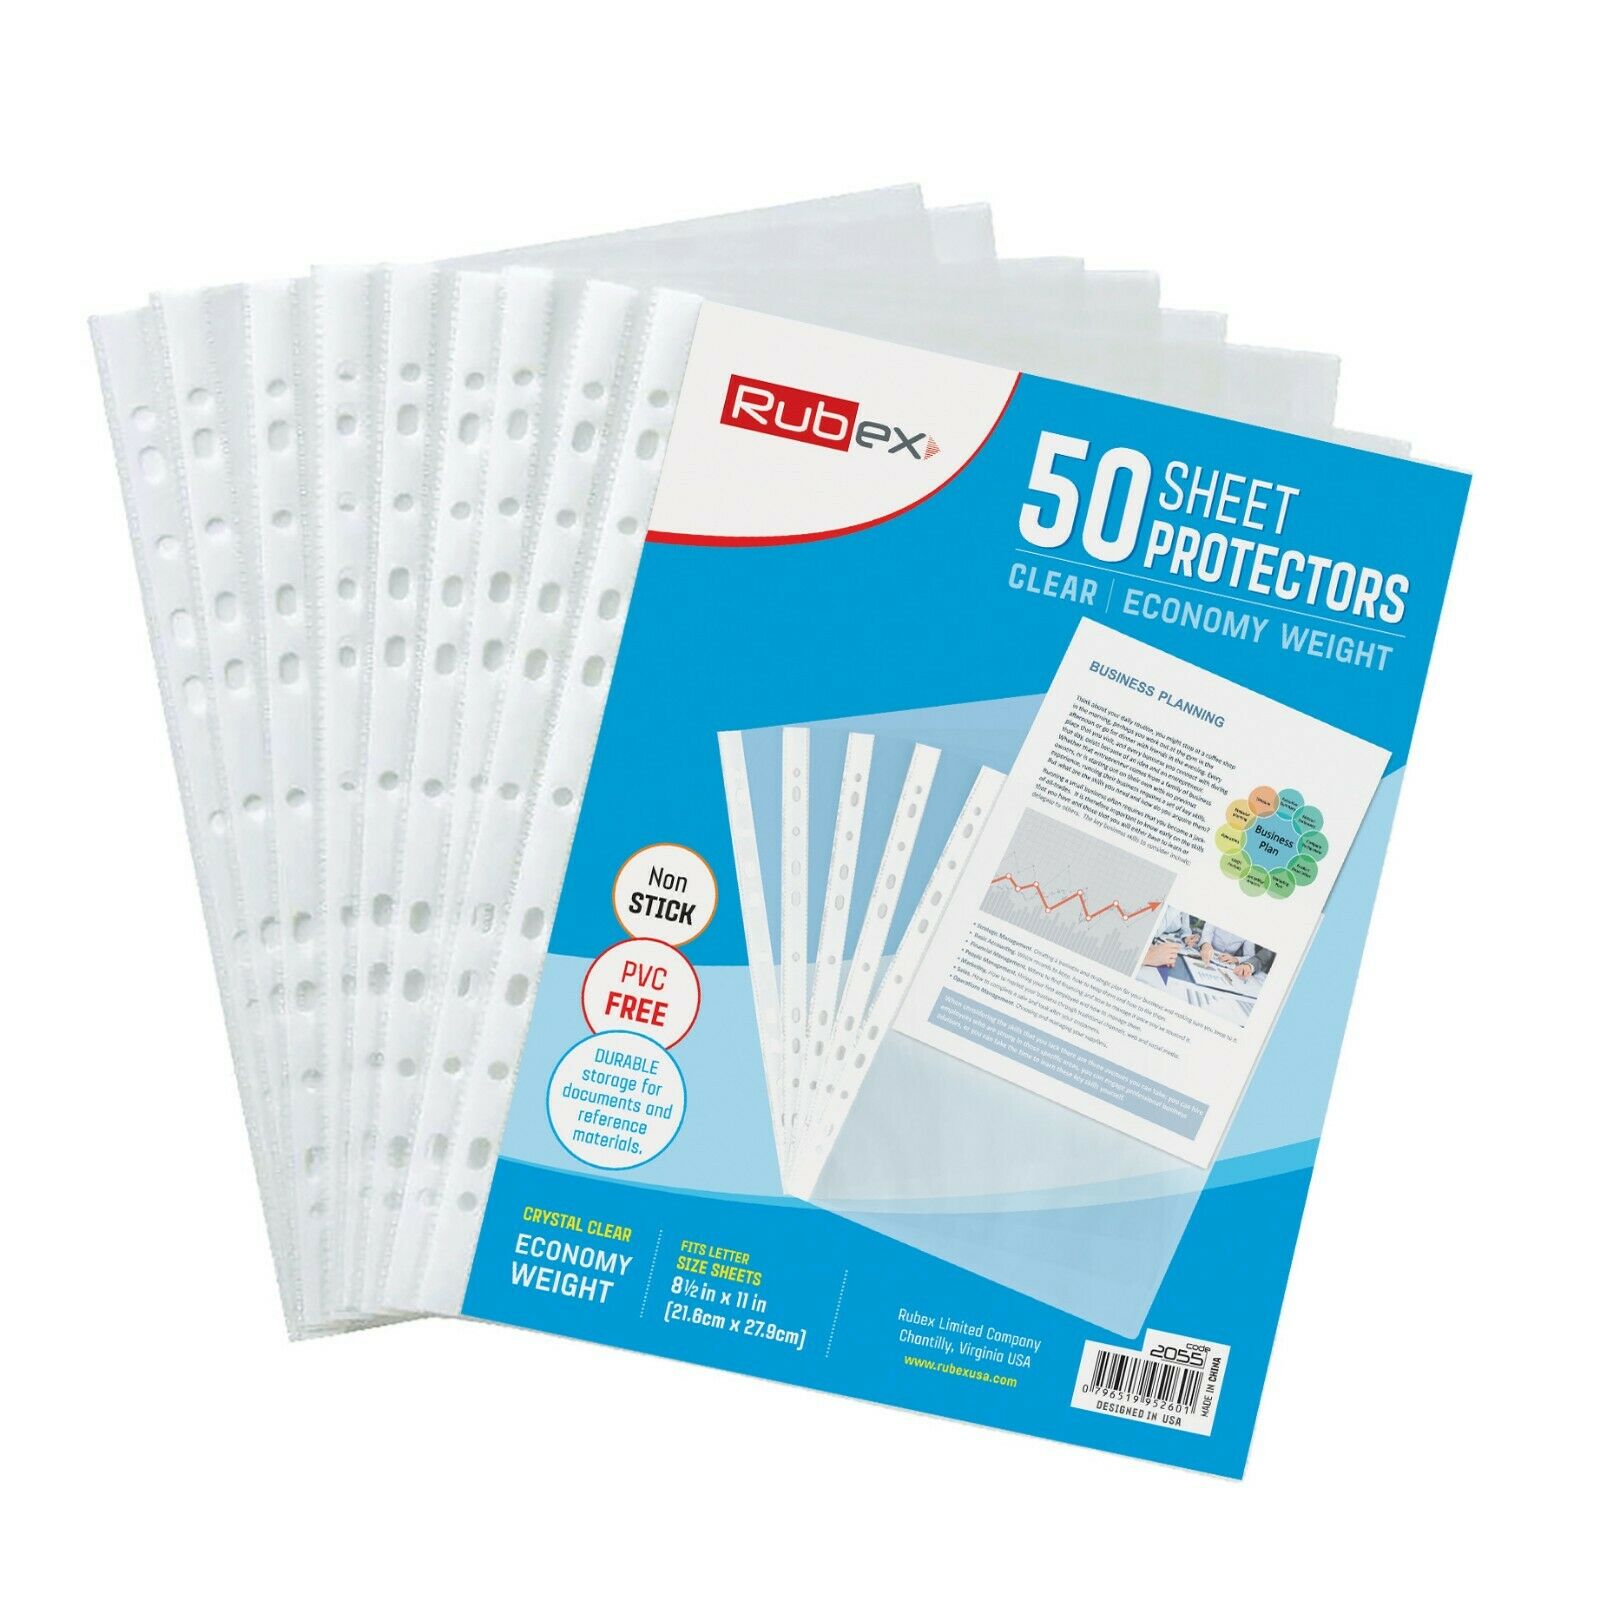 50 Sheet Protectors, Holds 8.5 x 11 inch Sheets